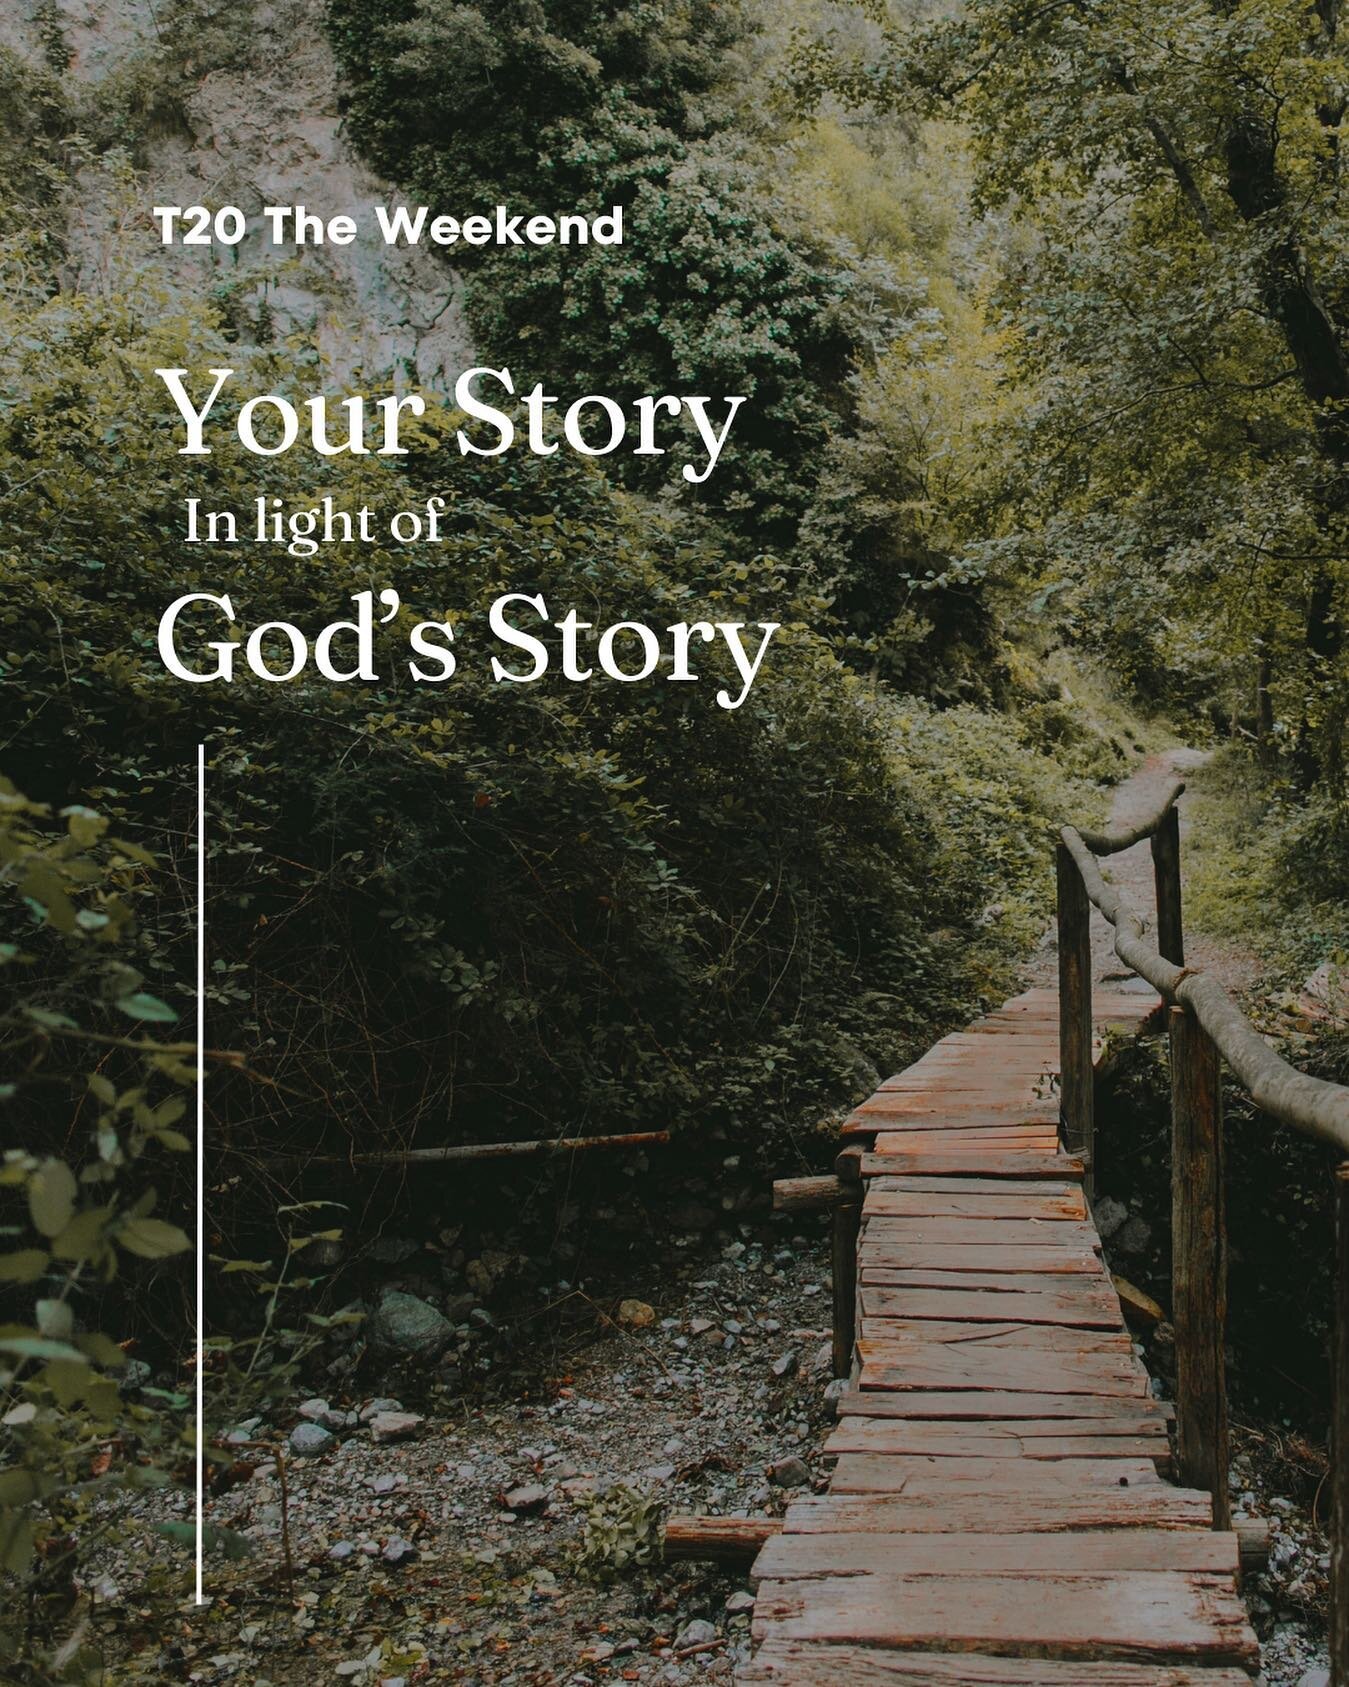 The T20 Lead team has been praying and preparing for The Weekend 2023 and we are excited to finally introduce to you the focus for T20&rsquo;s The Weekend retreat! This year at The Weekend we will be learning to &lsquo;See our Story in light of God&r